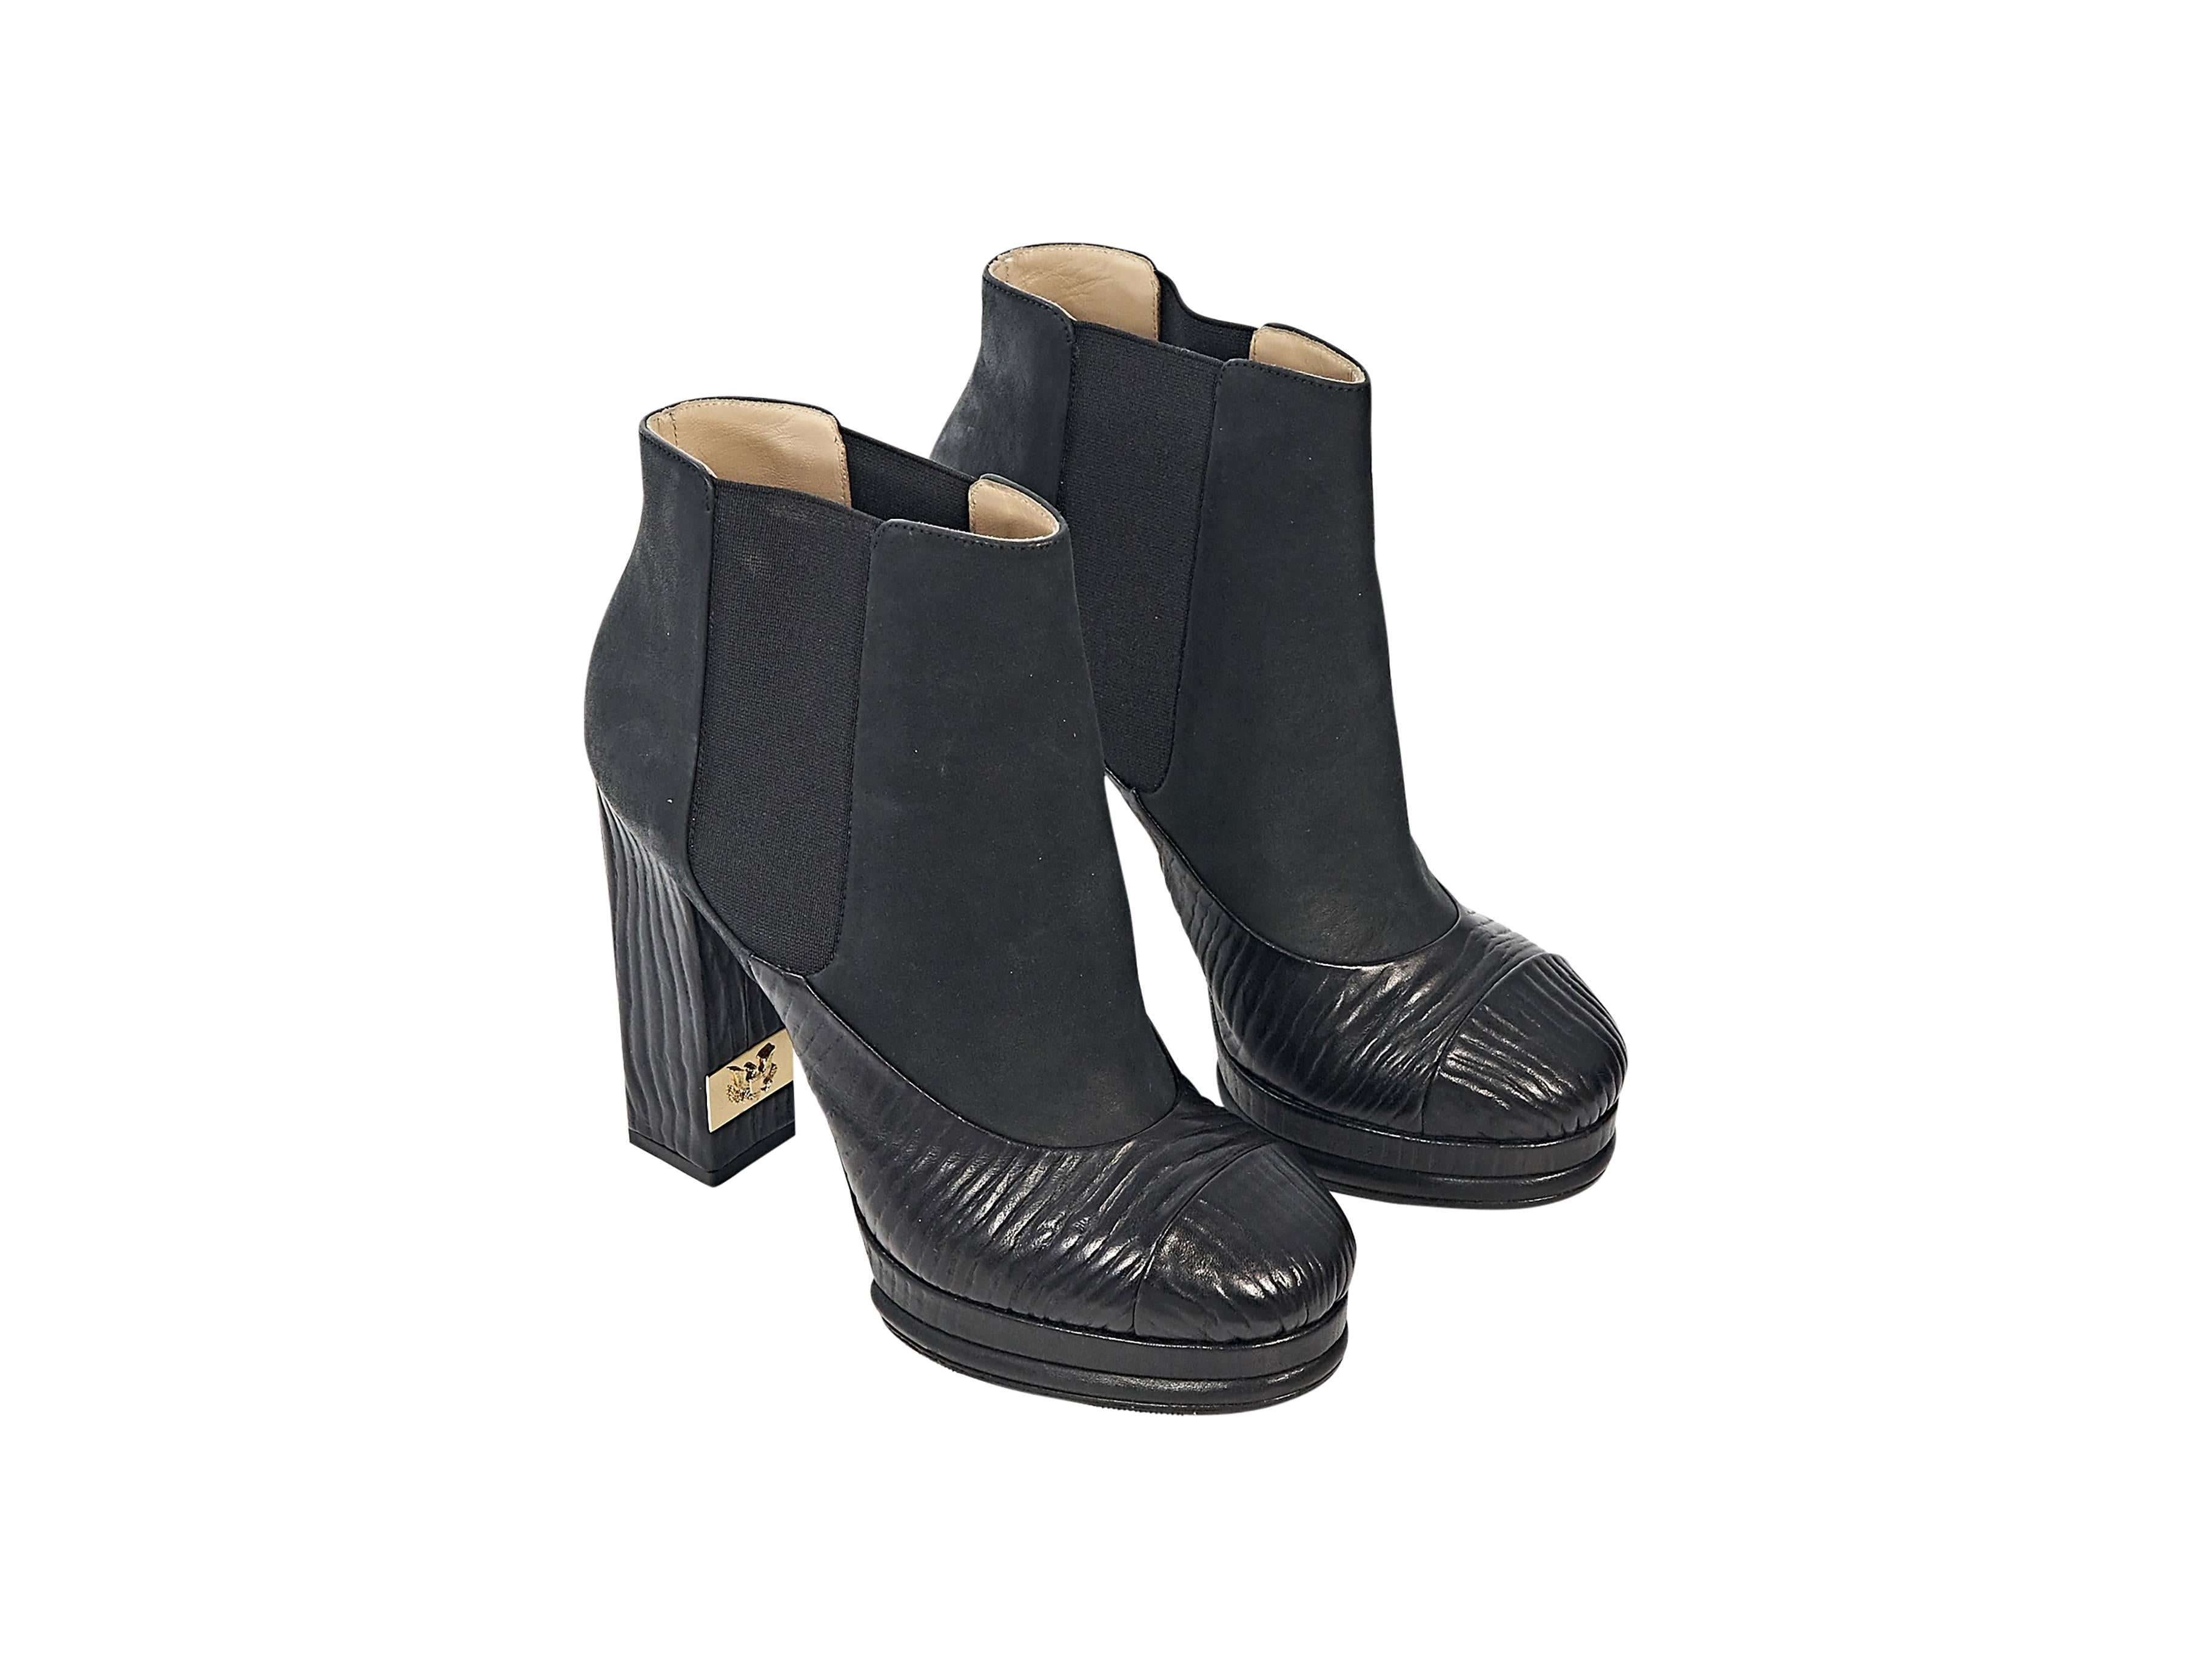 Product details:  Black textured heeled Chelsea boots by Chanel.  Elasticized side panels for an easy fit.  Round cap toe.  Platform and towering heel.  Slip-on style.  Goldtone hardware. 
Condition: Excellent. 